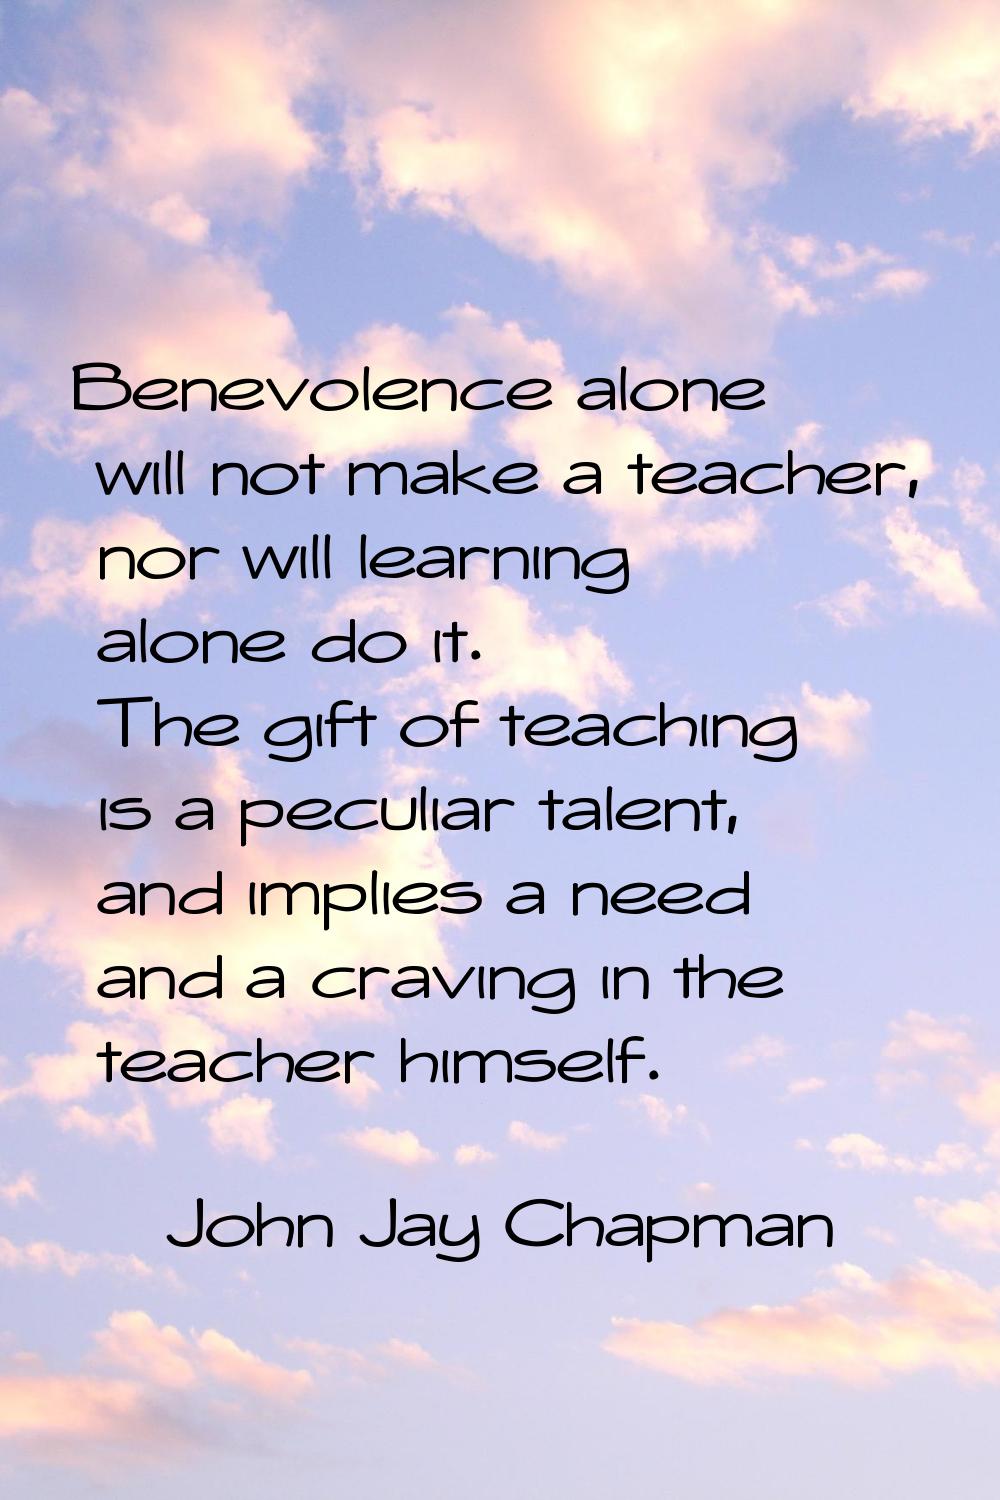 Benevolence alone will not make a teacher, nor will learning alone do it. The gift of teaching is a